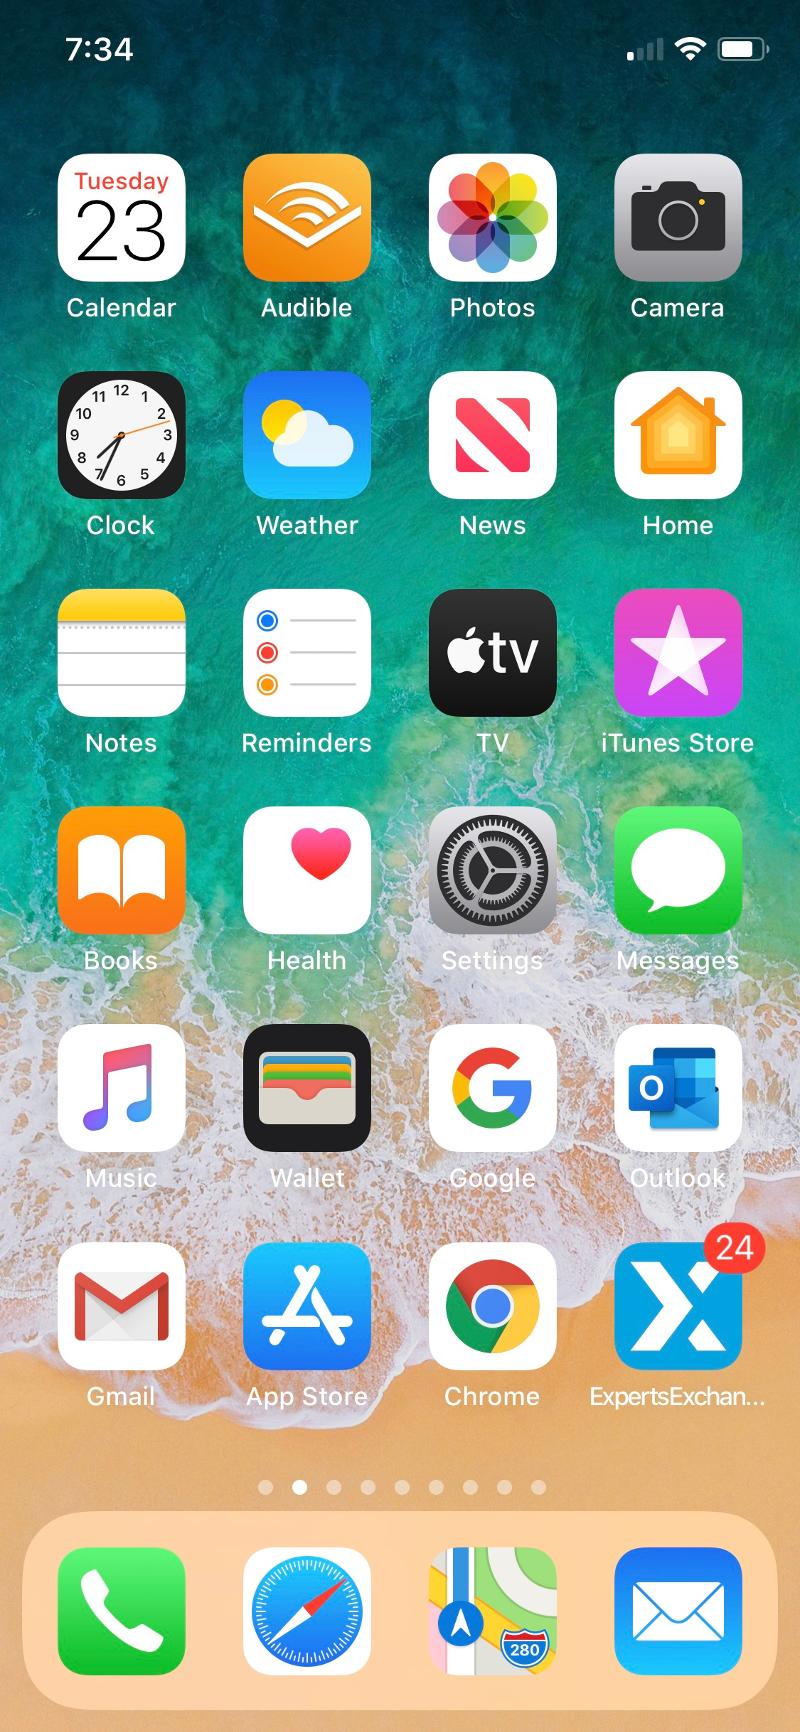 Gmail app icon on iPhone home screen no l… Apple Community